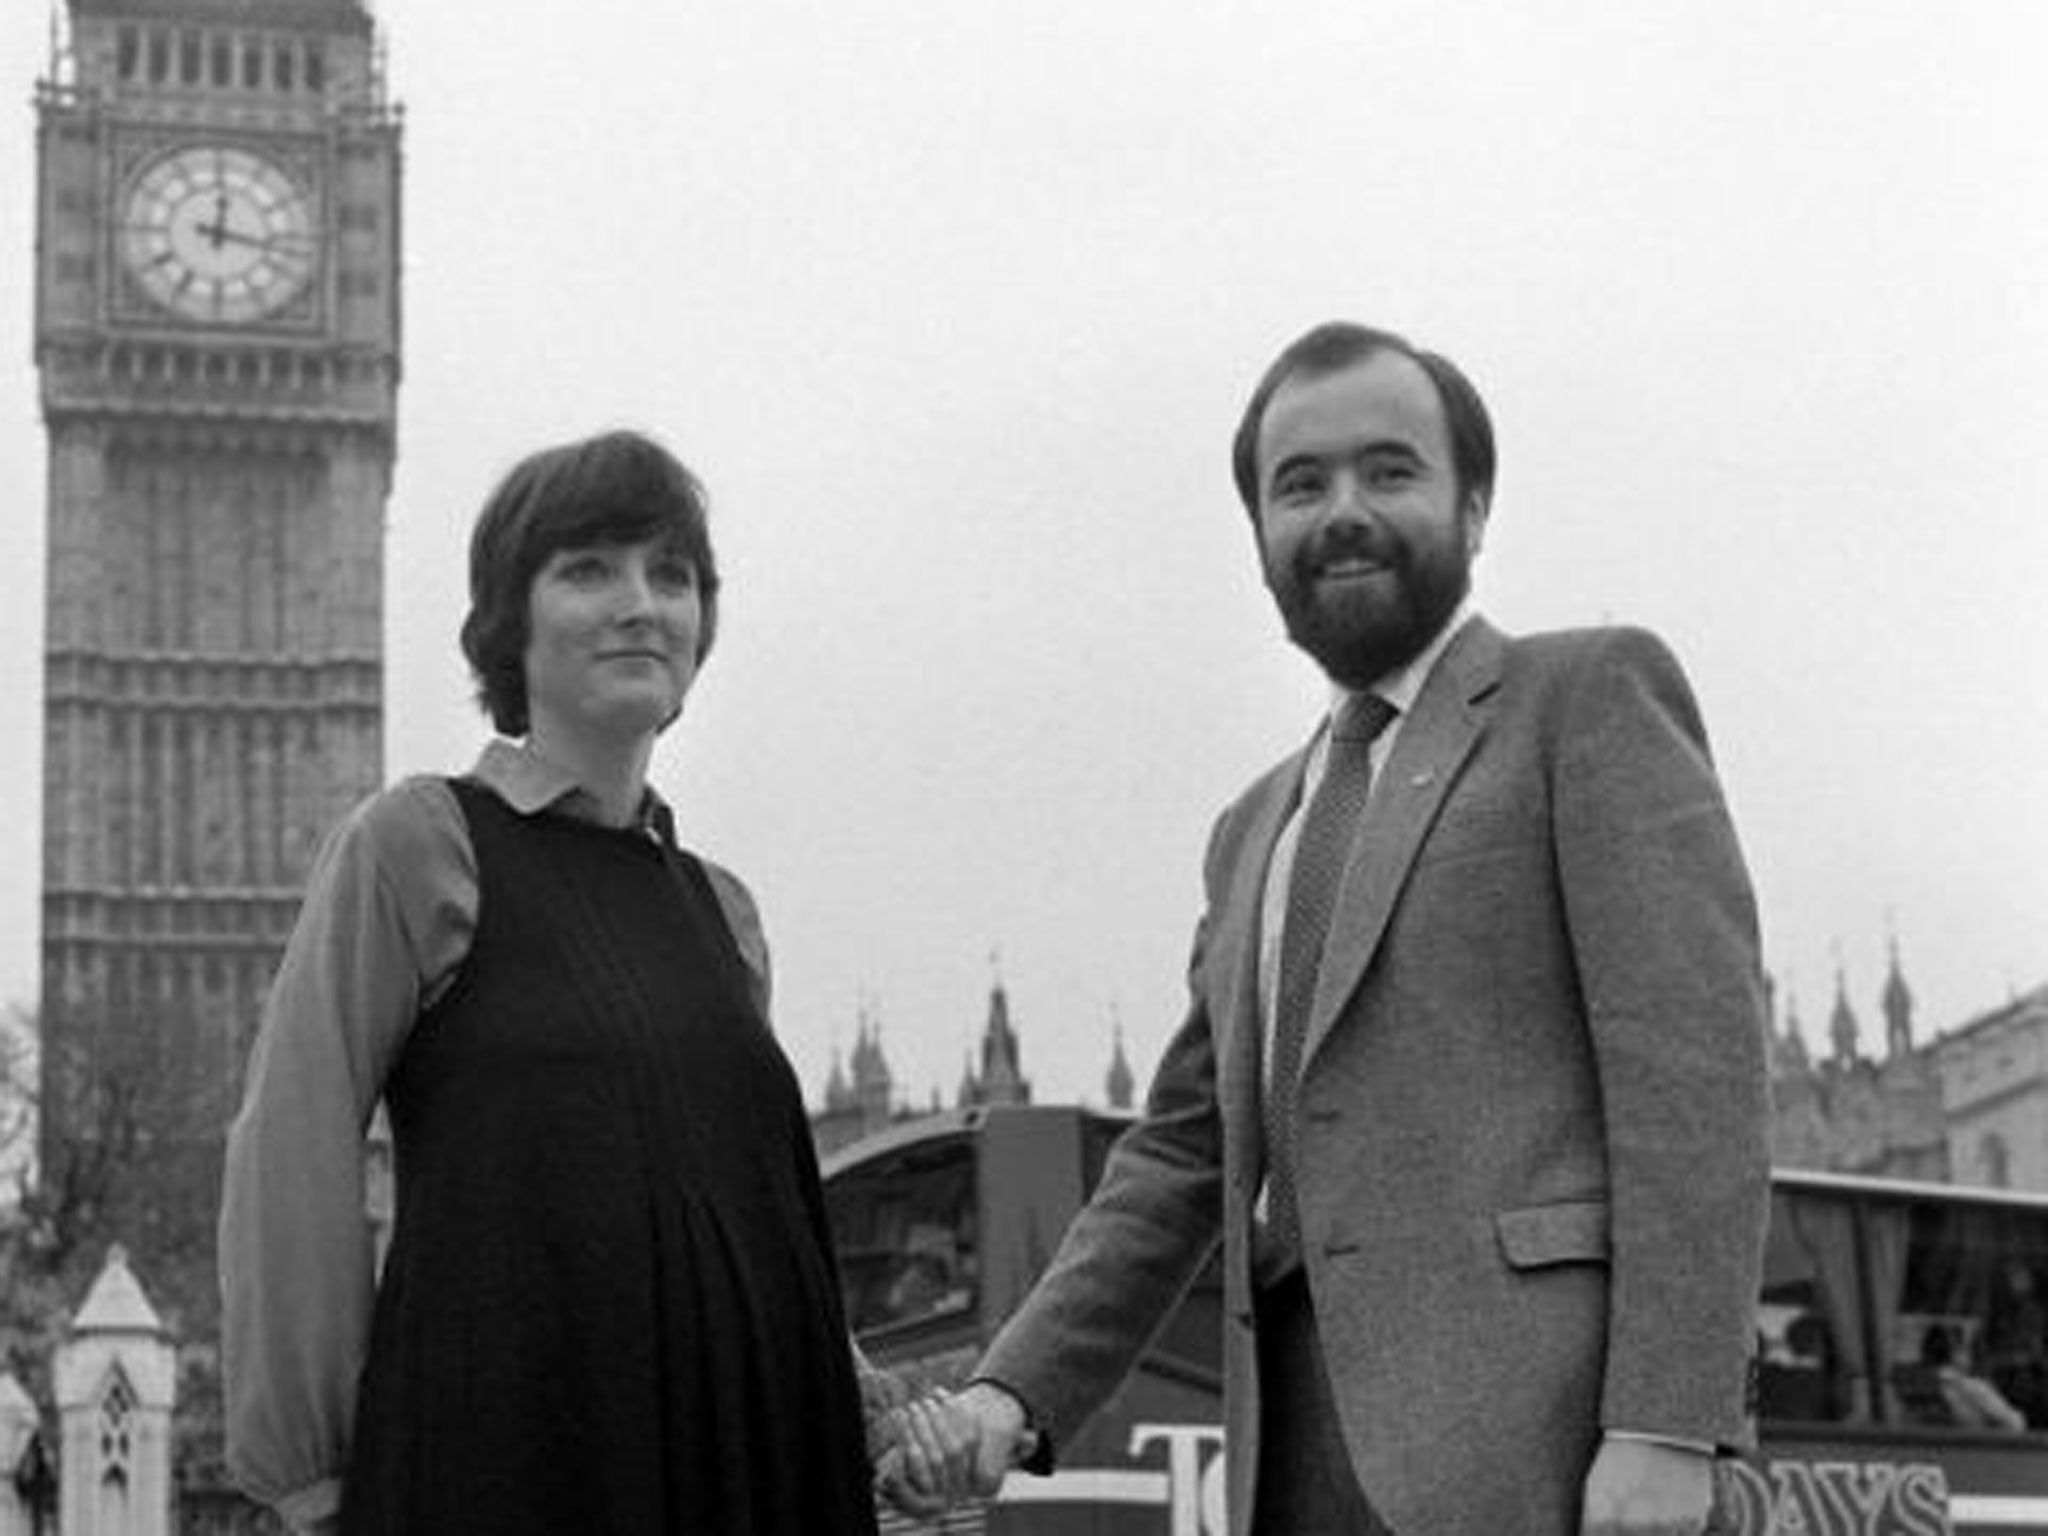 Harman and her Husband Jack Dromey outside the Houses of Parliament in 1982